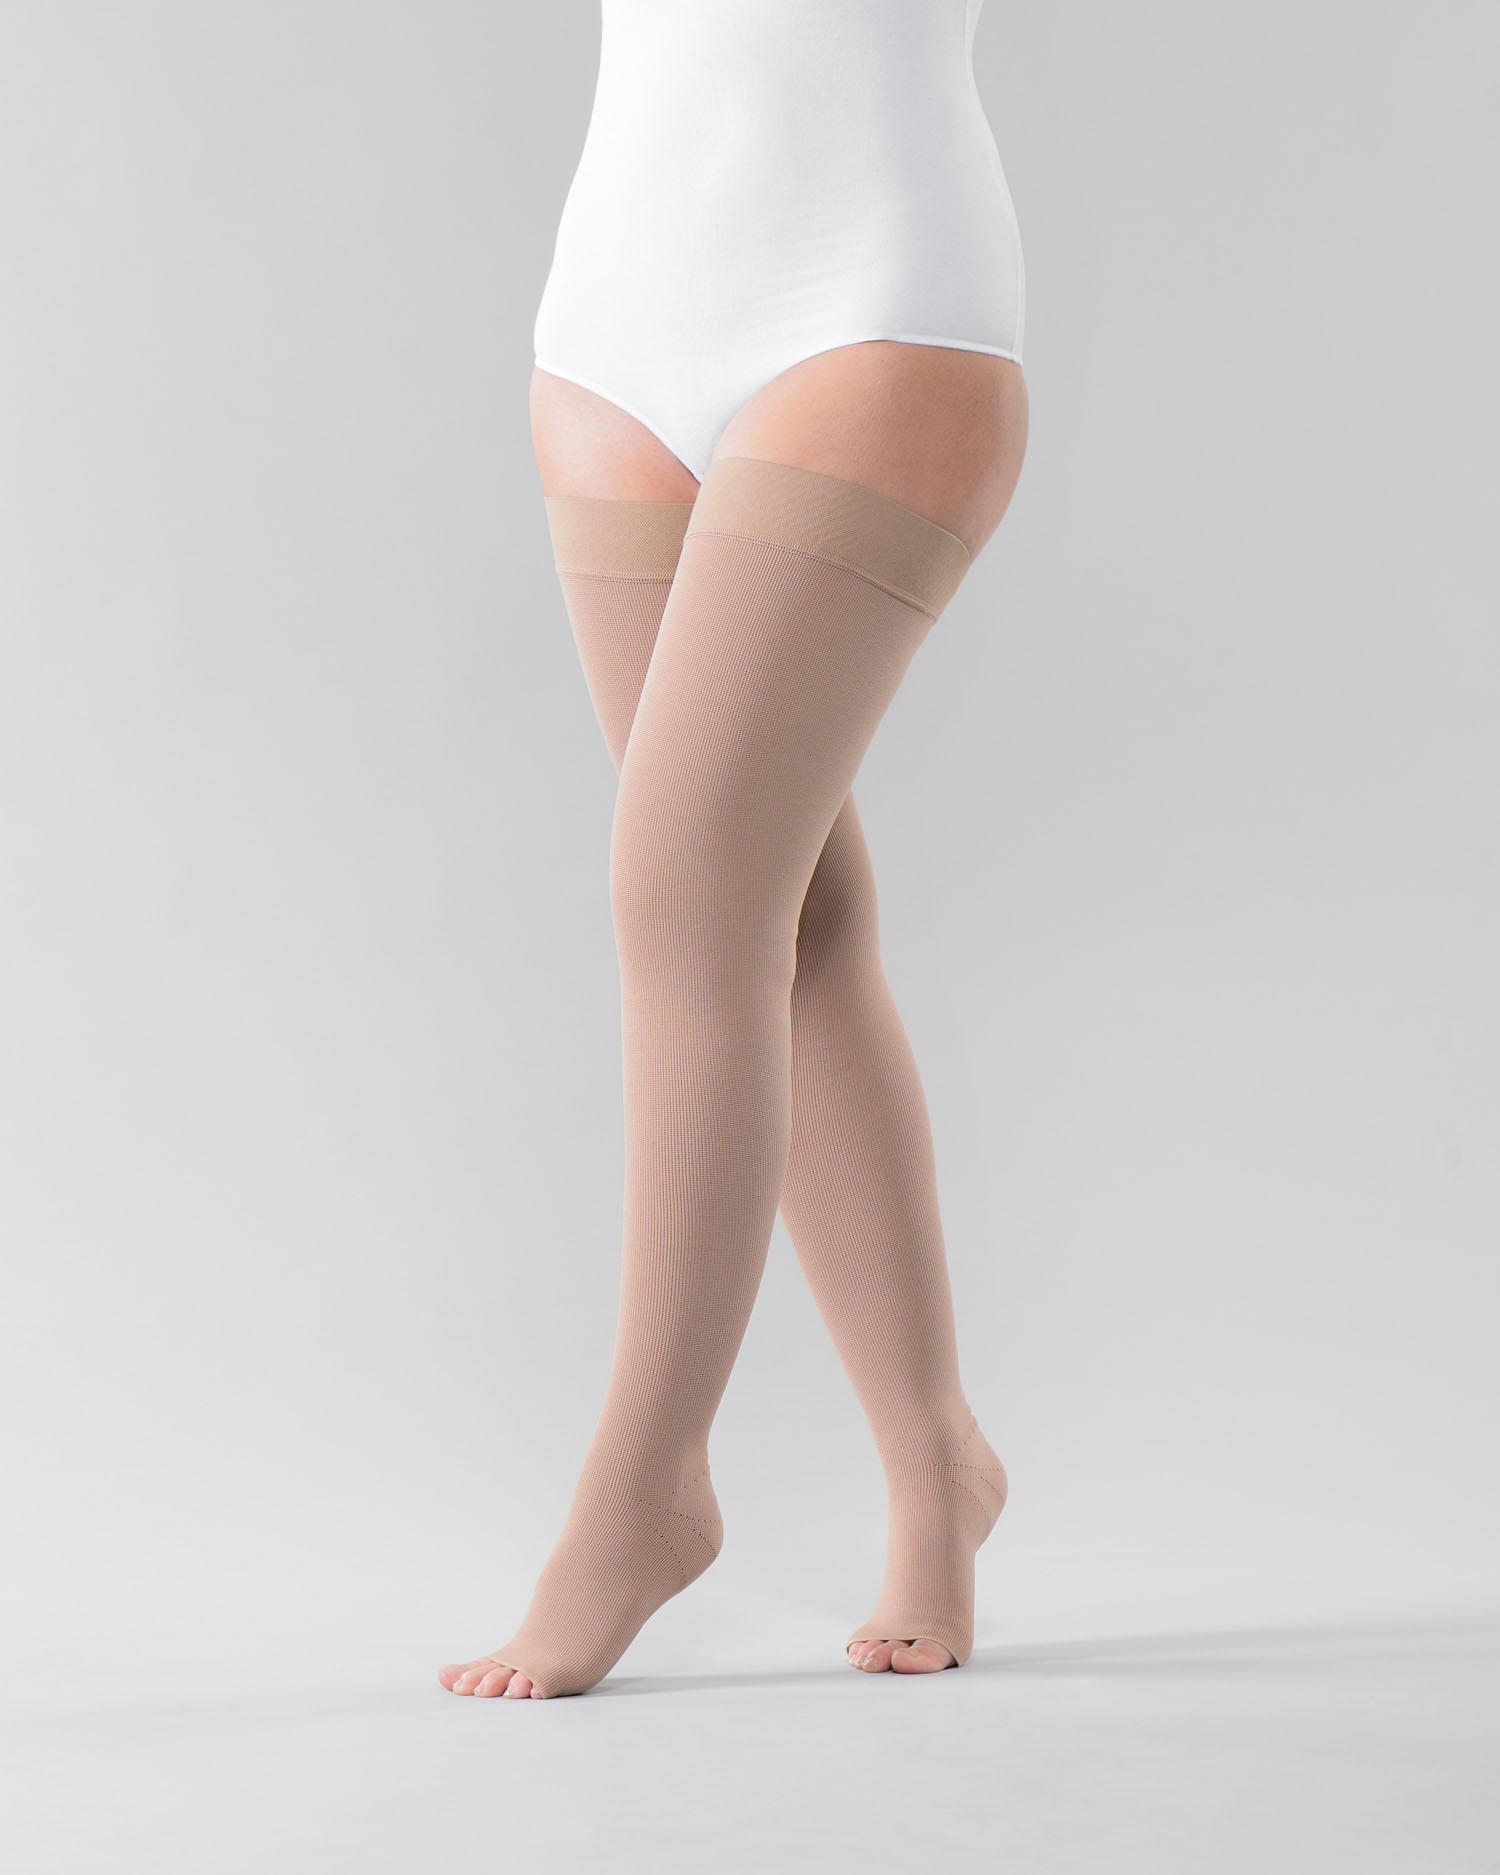 High Waist Compression Girdle Below Knee - Contact Closure with